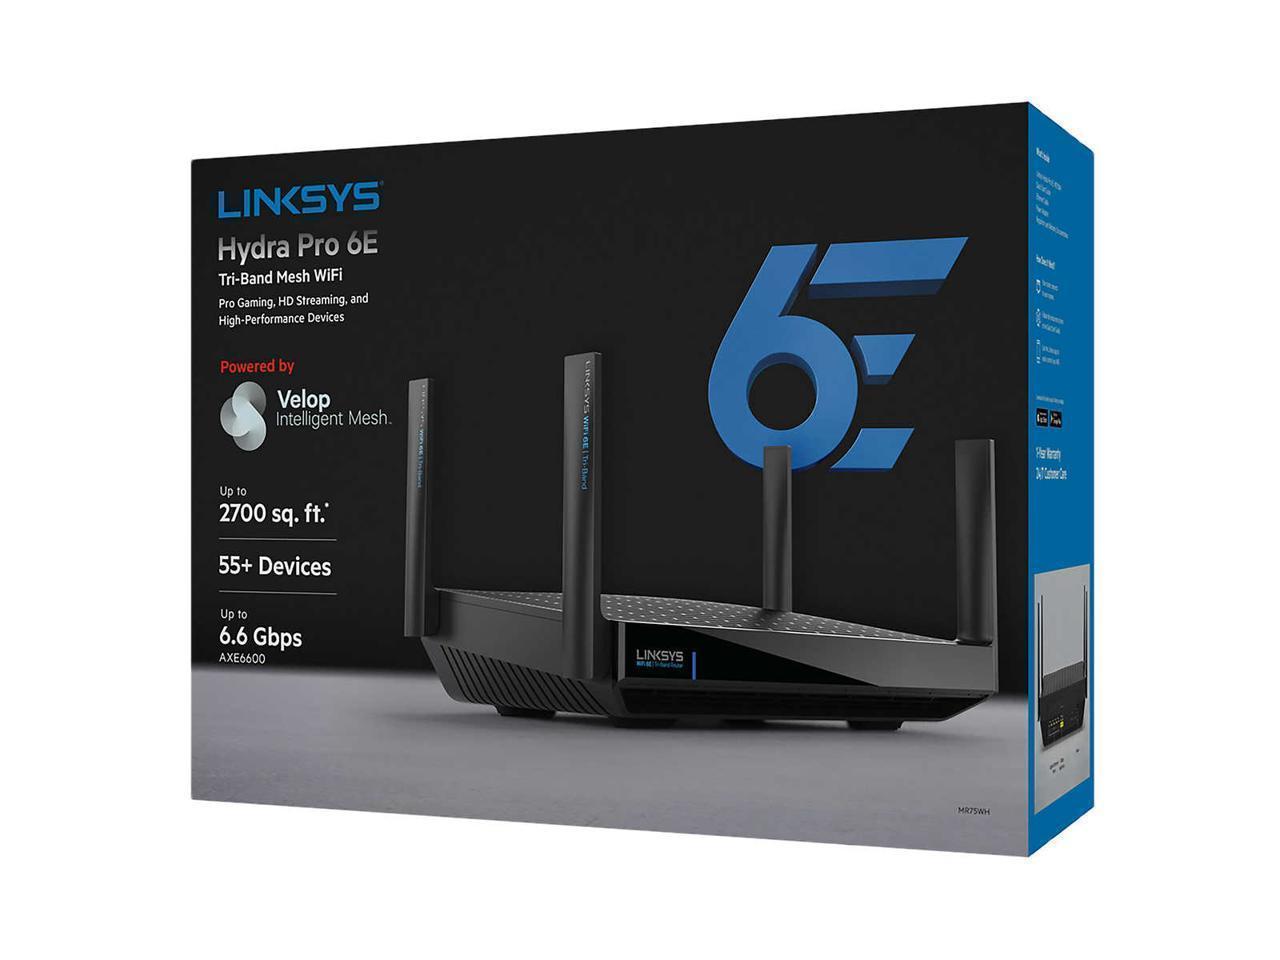 New Linksys Hydra Pro 6E Tri-band Mesh WiFi AXE6600 Router MR75WH